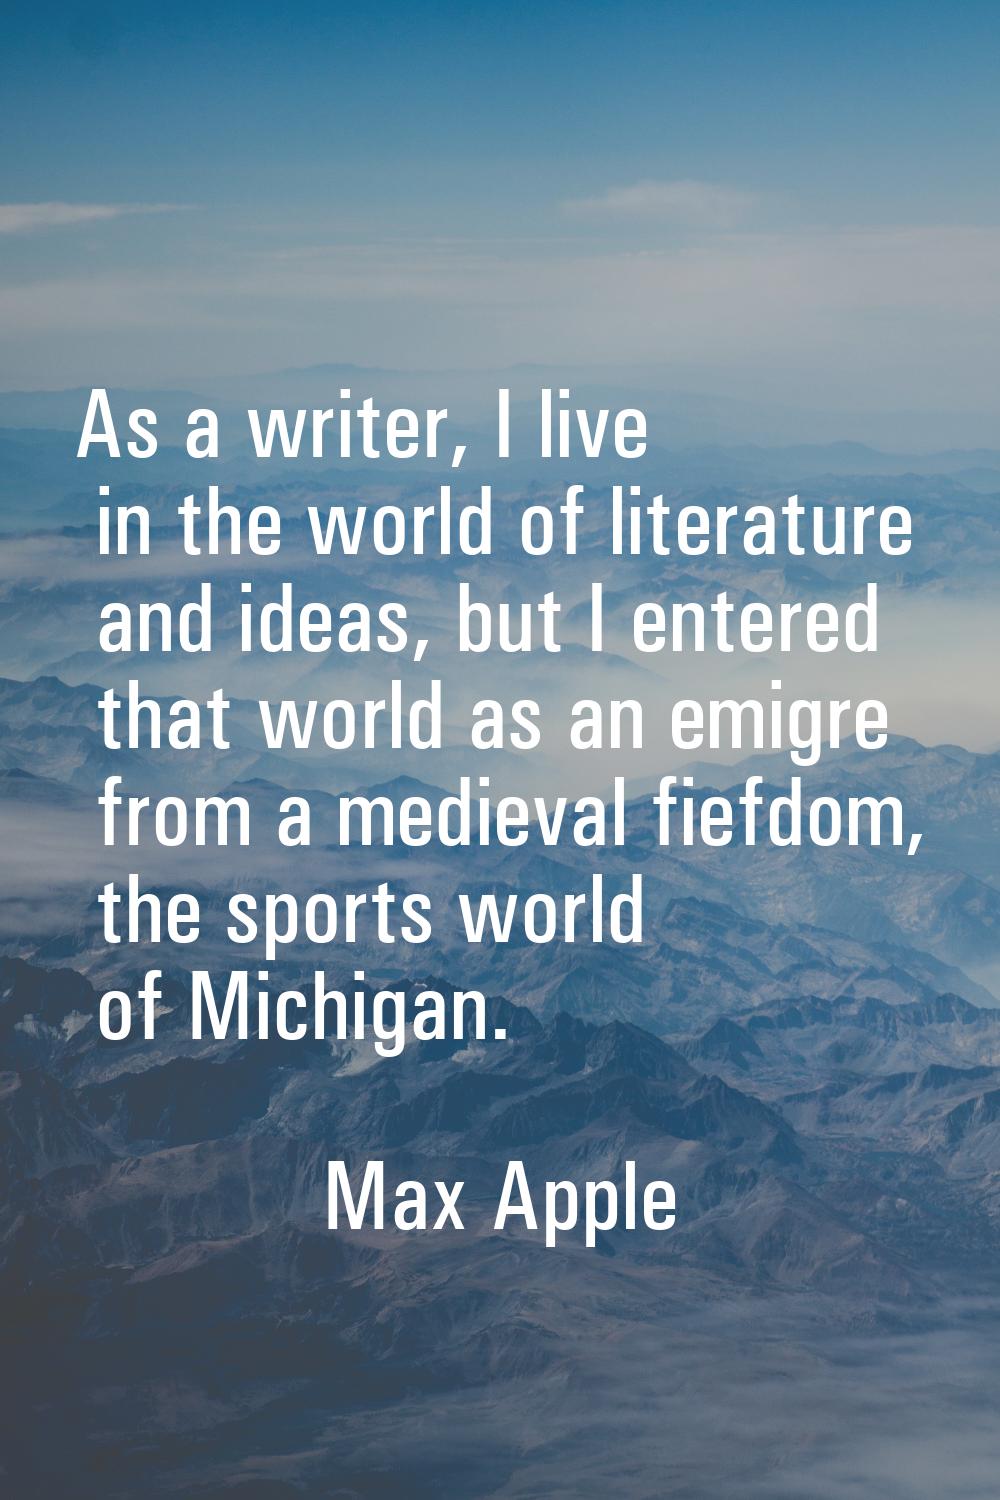 As a writer, I live in the world of literature and ideas, but I entered that world as an emigre fro